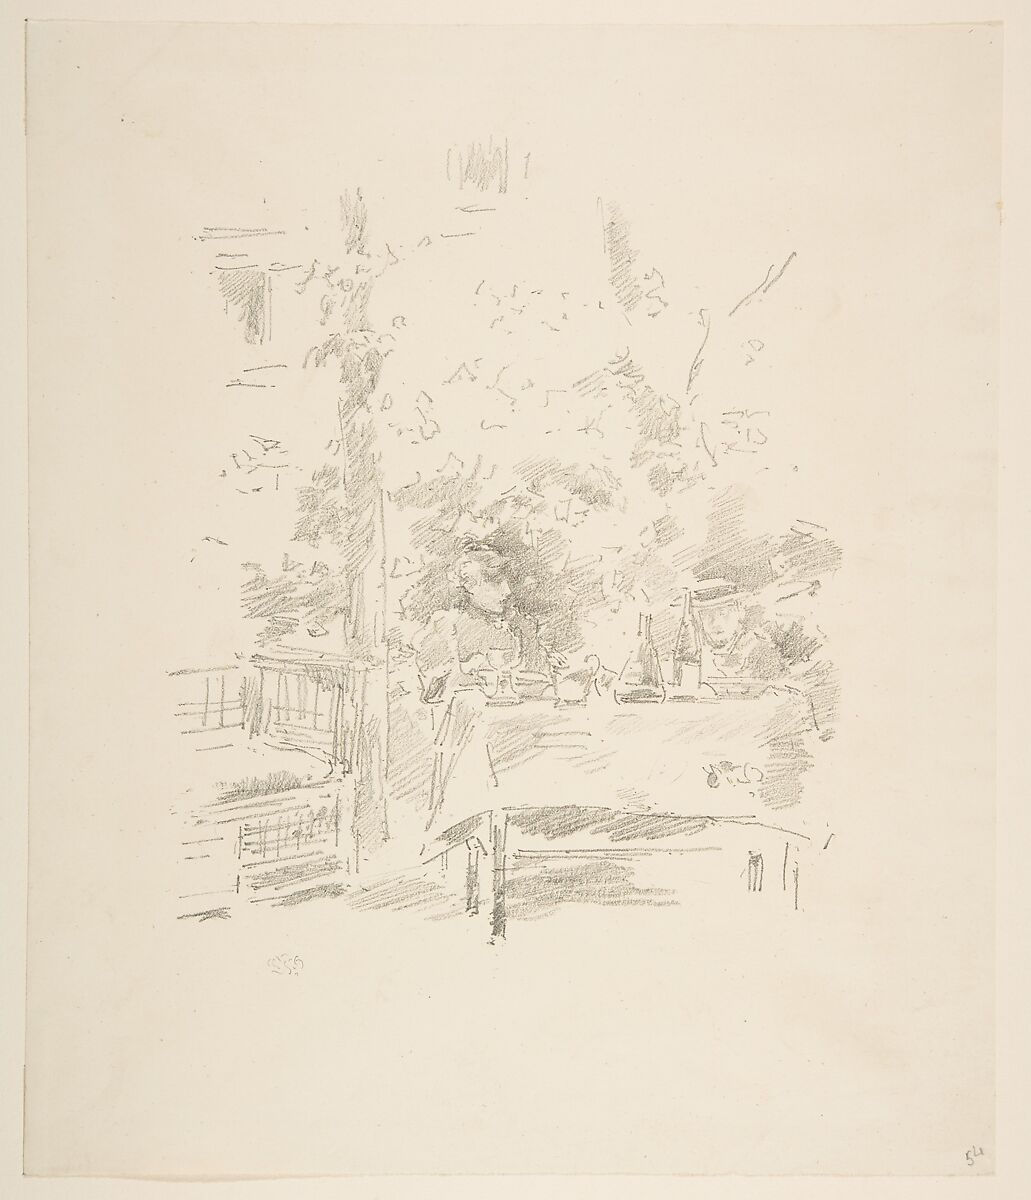 Tête-à-tête in the Garden, James McNeill Whistler (American, Lowell, Massachusetts 1834–1903 London), Transfer lithograph; only state (Chicago); printed in black ink on cream wove paper 